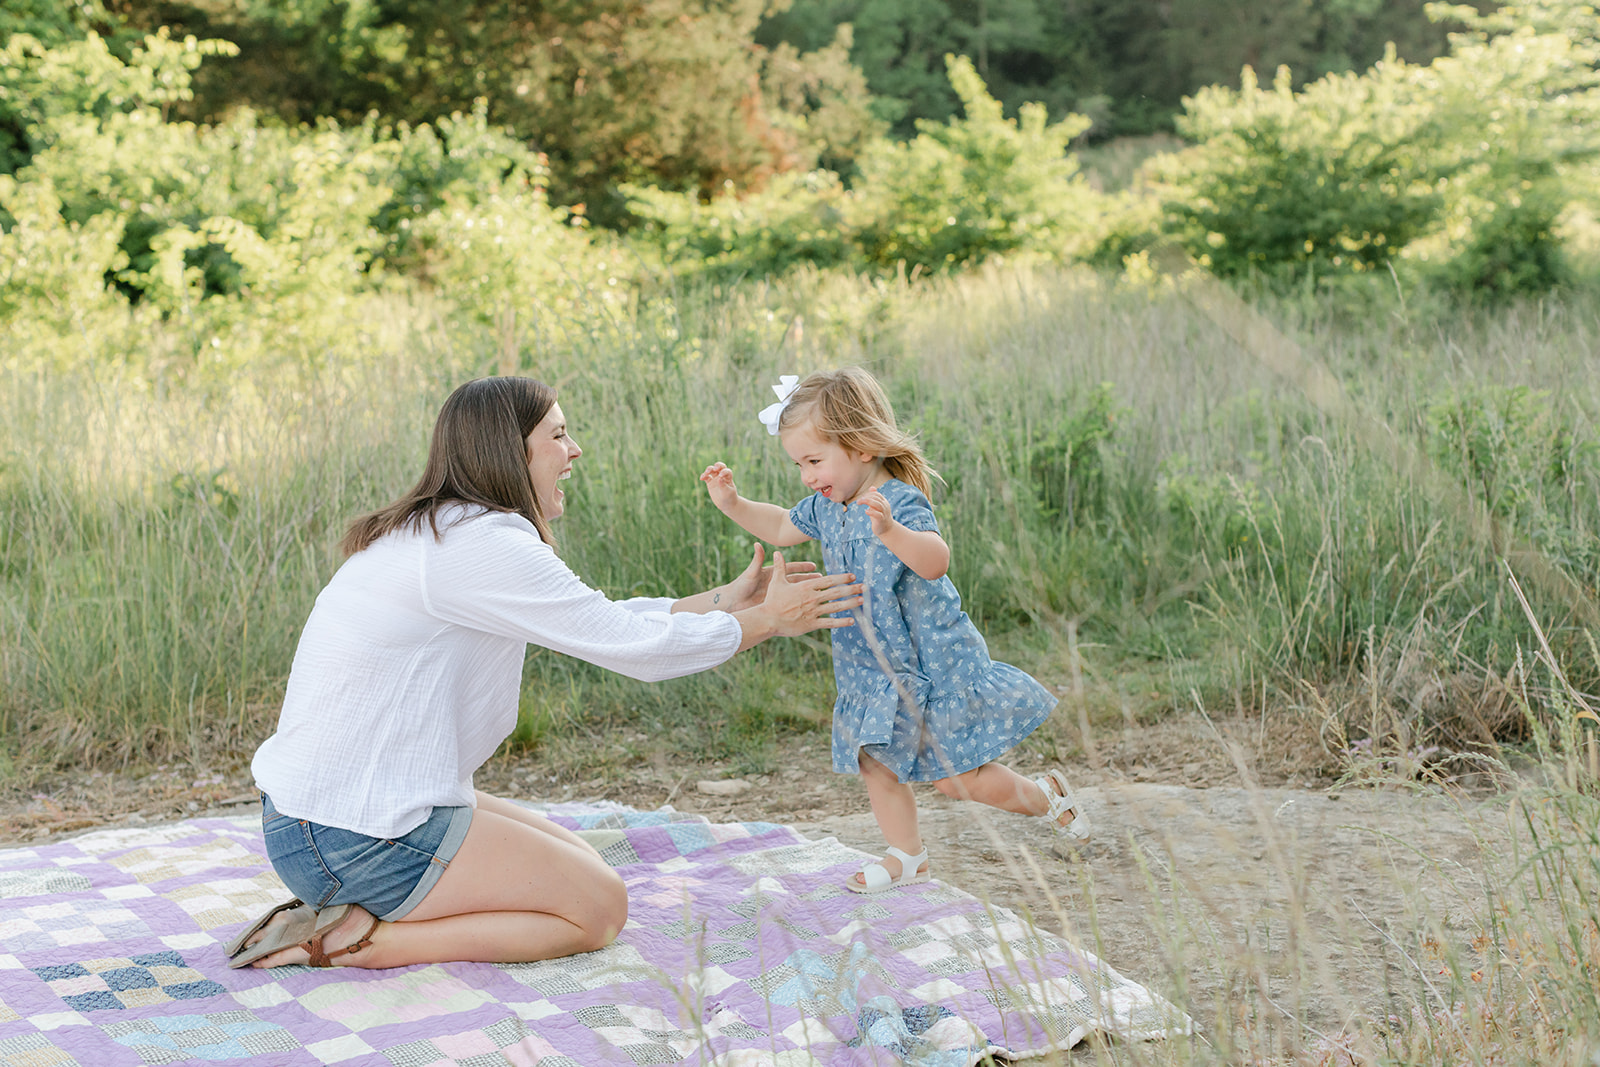 outdoor family photos for 2 year baby milestone session in nashville tennessee. photo of mom and daughter